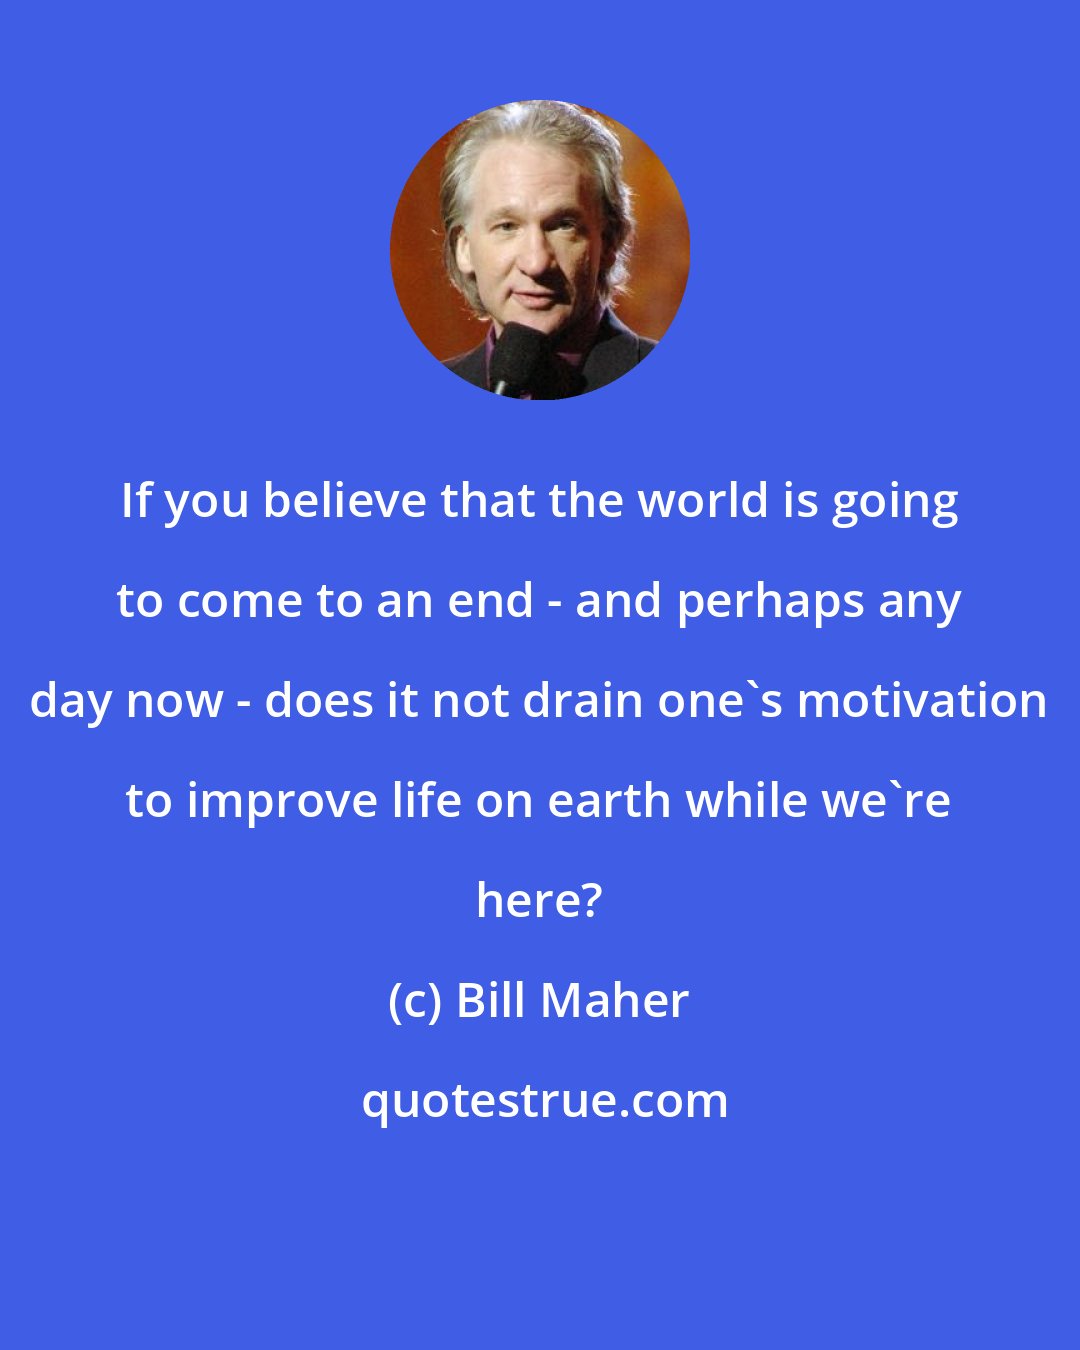 Bill Maher: If you believe that the world is going to come to an end - and perhaps any day now - does it not drain one's motivation to improve life on earth while we're here?